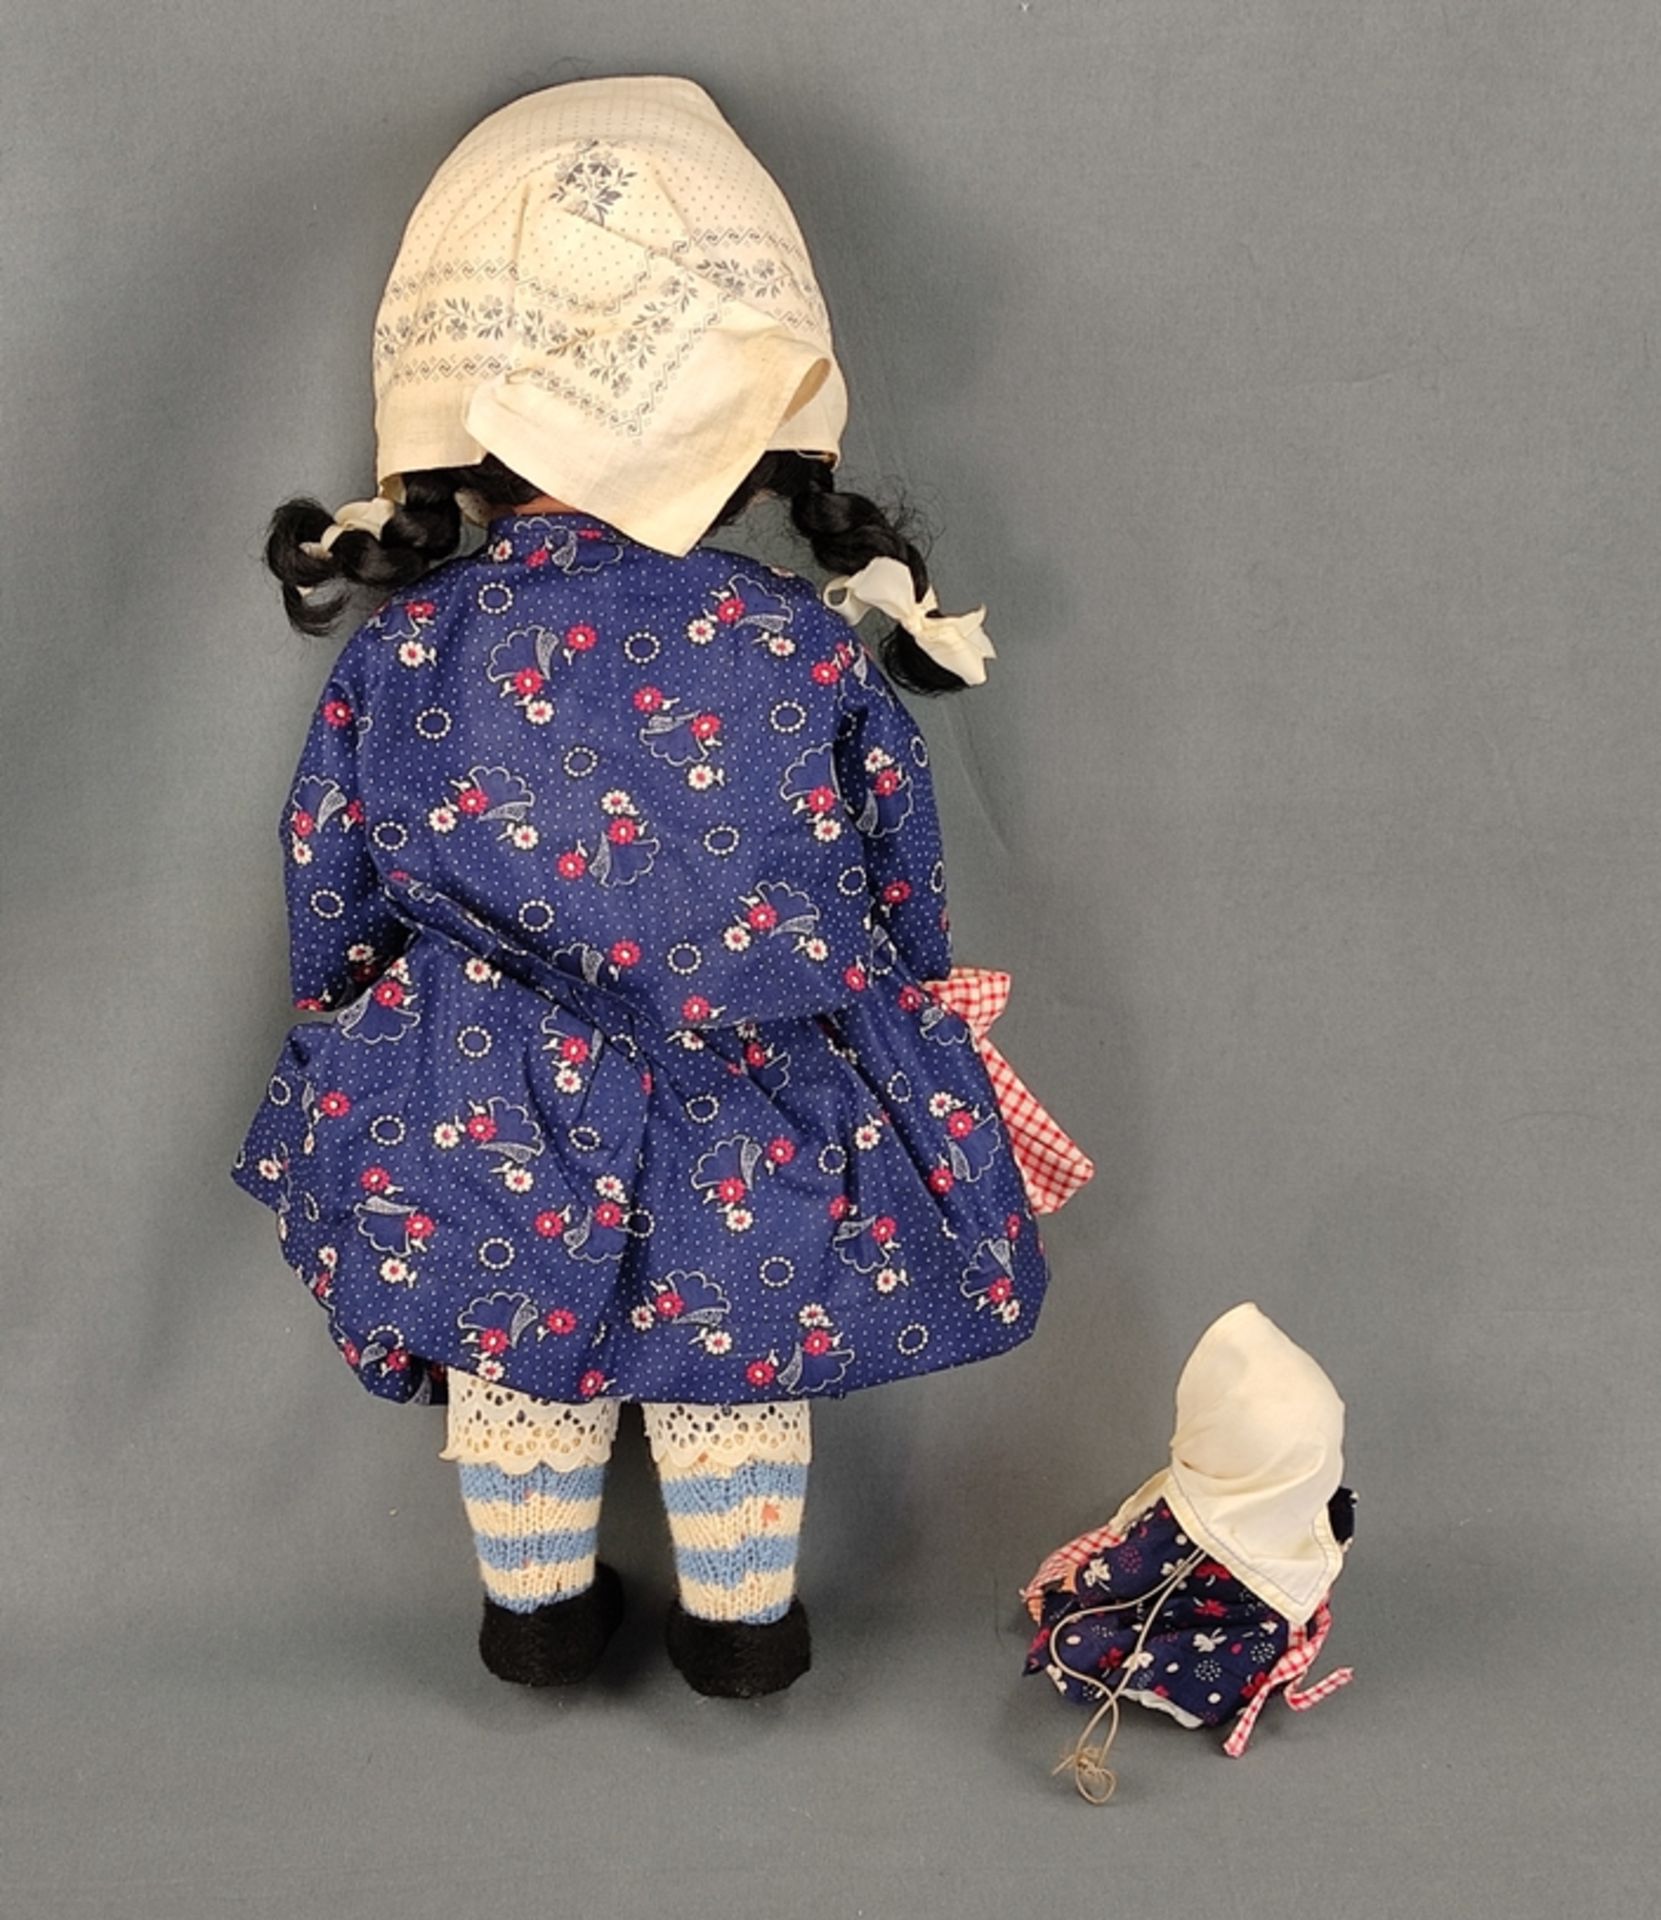 Schildkröt doll with baby, in peasant clothes and original box, sleeping eyes and tilting voice, ne - Image 2 of 3